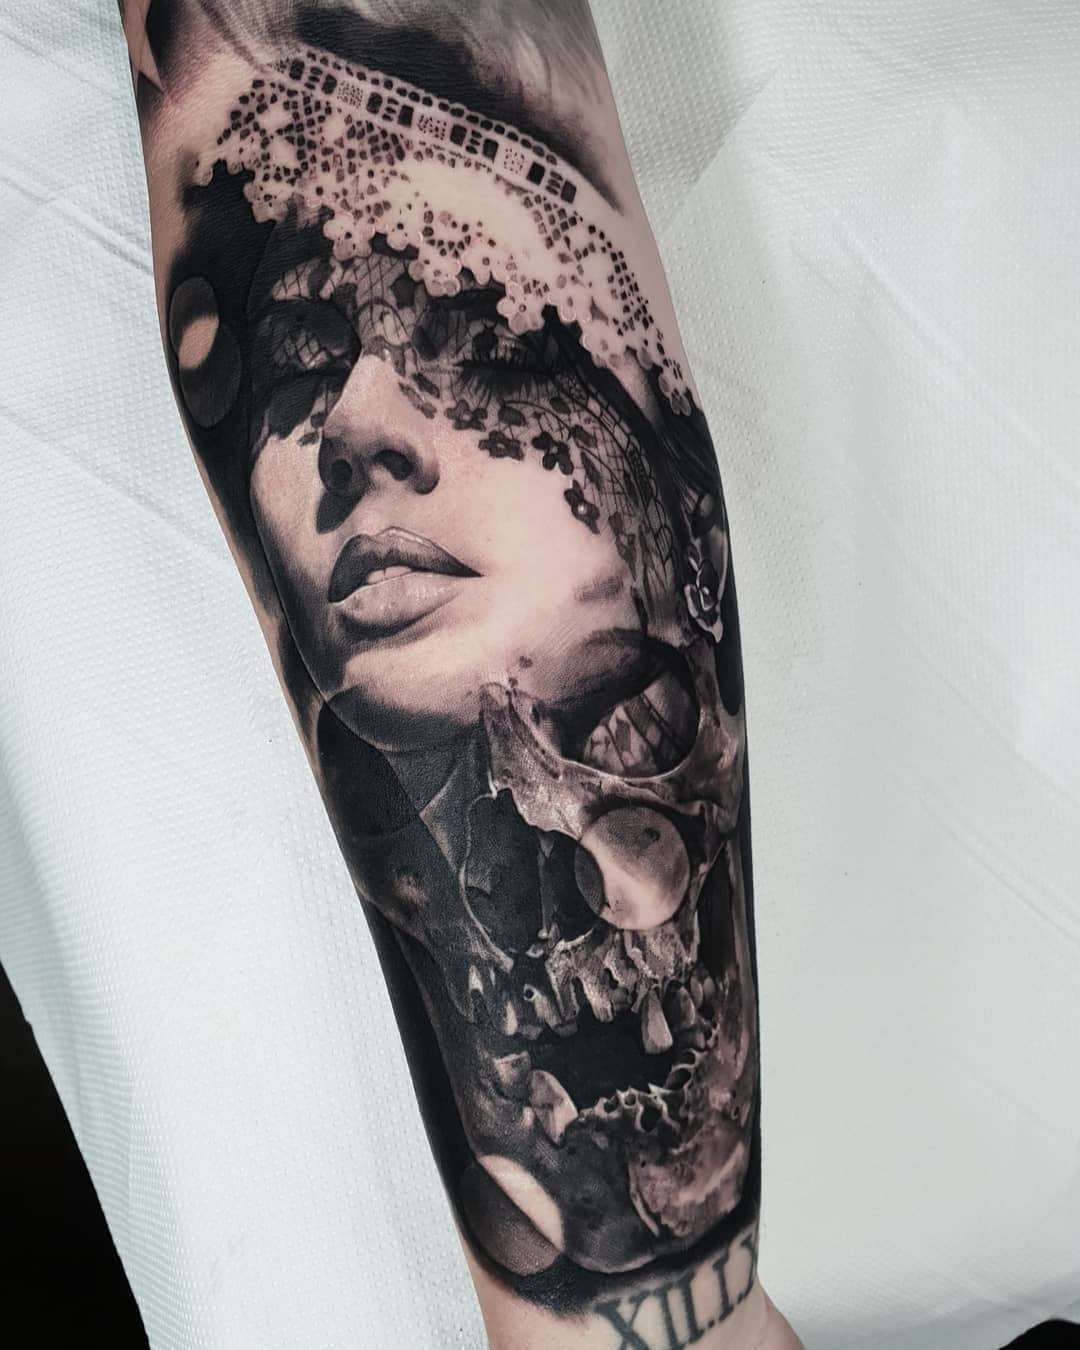 Black And Grey Realism Tattoo Artists Melbourne Get More Anythink's